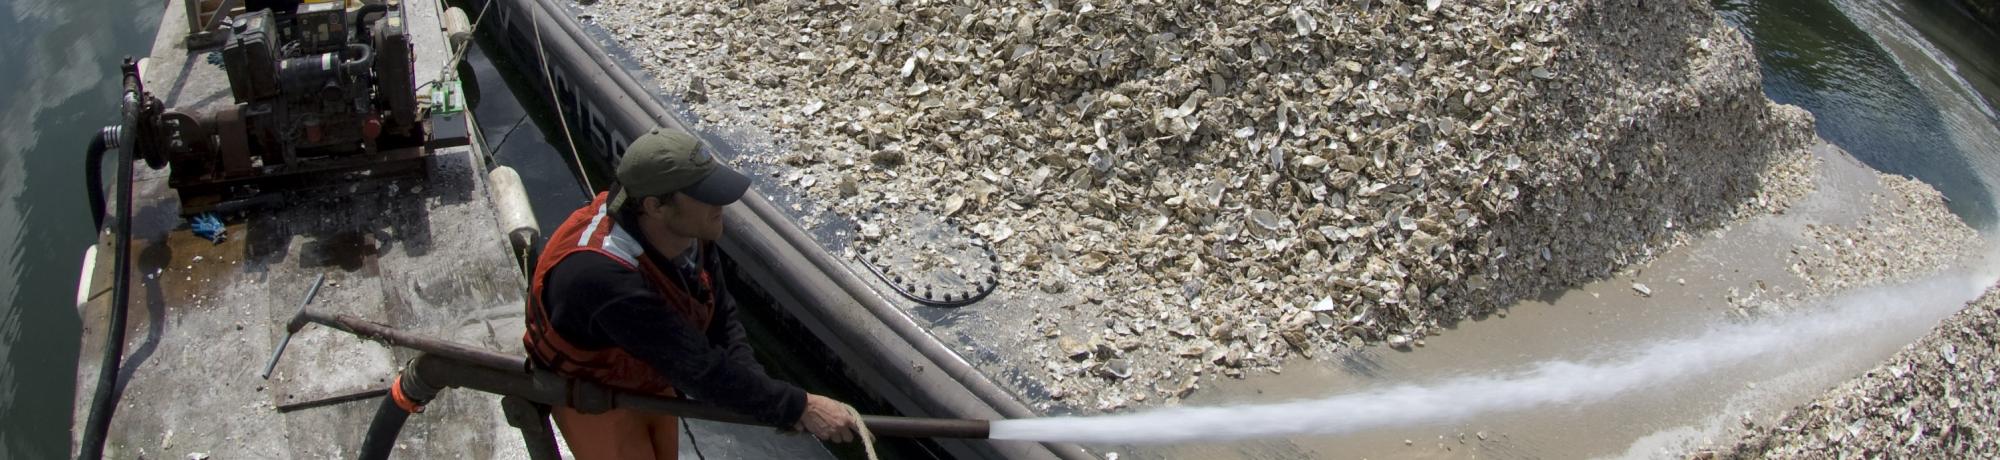 Spreading oyster shell from a barge